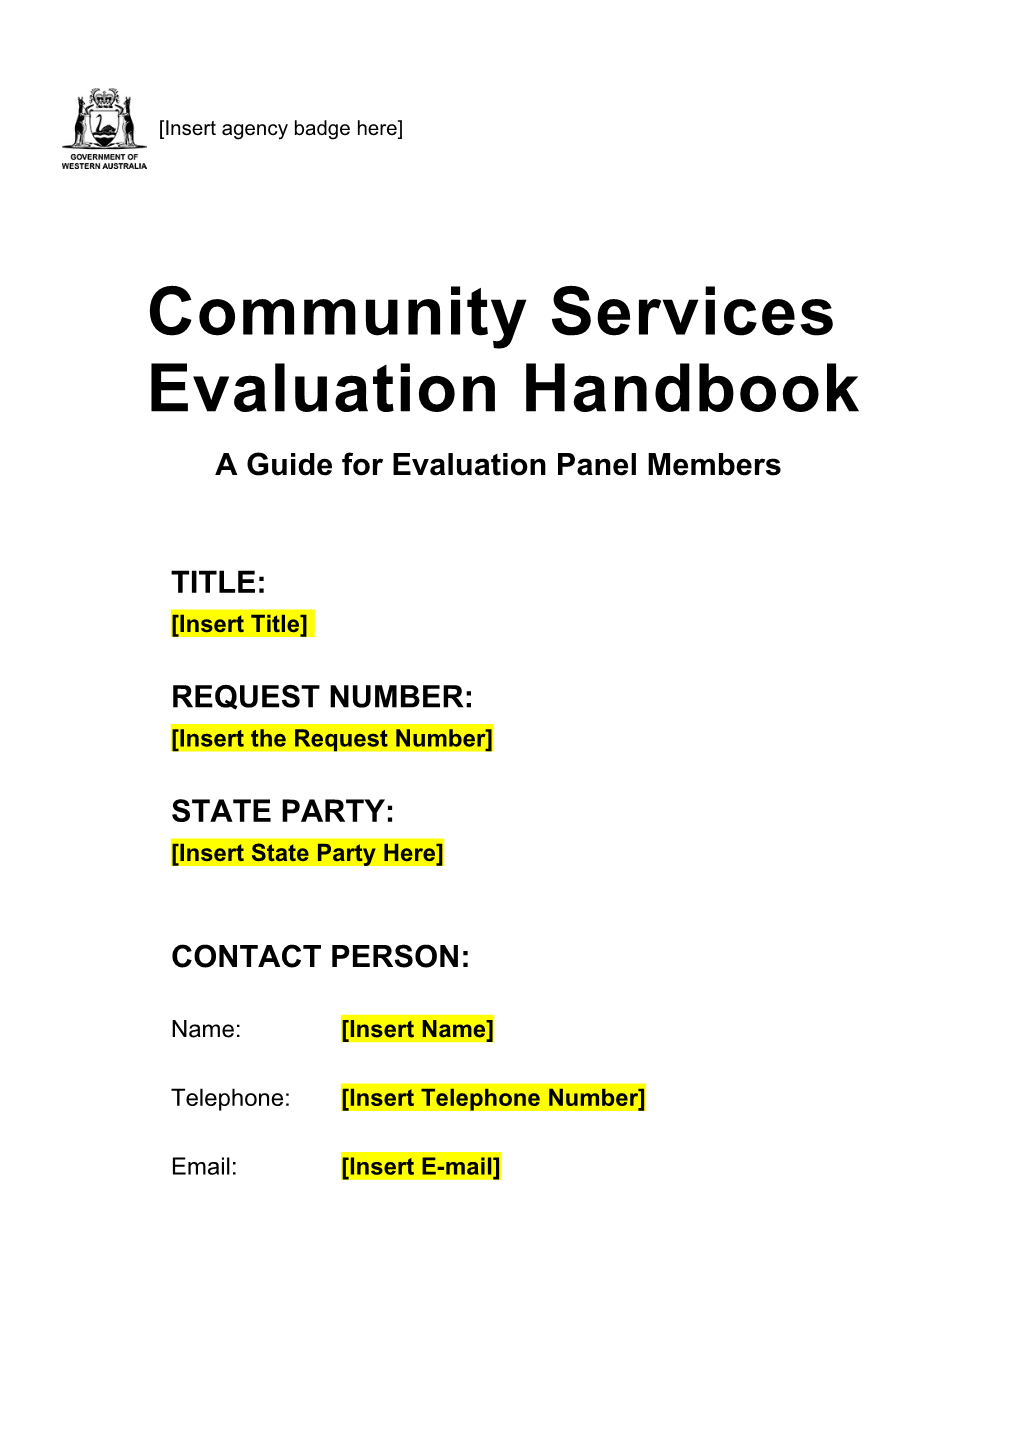 A Guide for Evaluation Panel Members